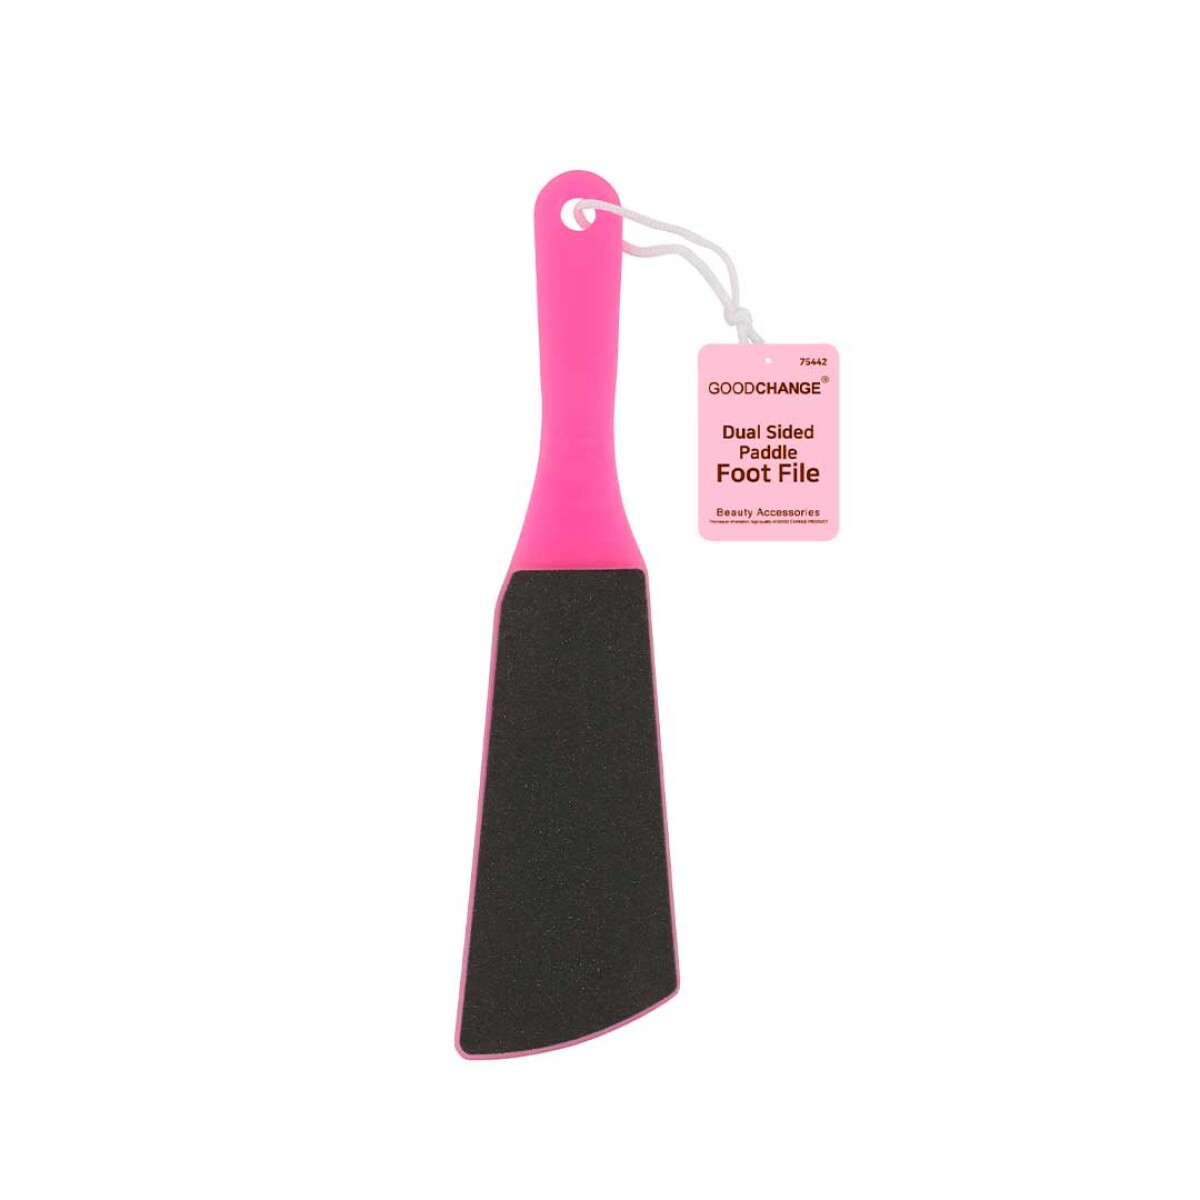 LIMA DE PIES DUAL - DUAL SIDED PADDLE FOOT FILE 